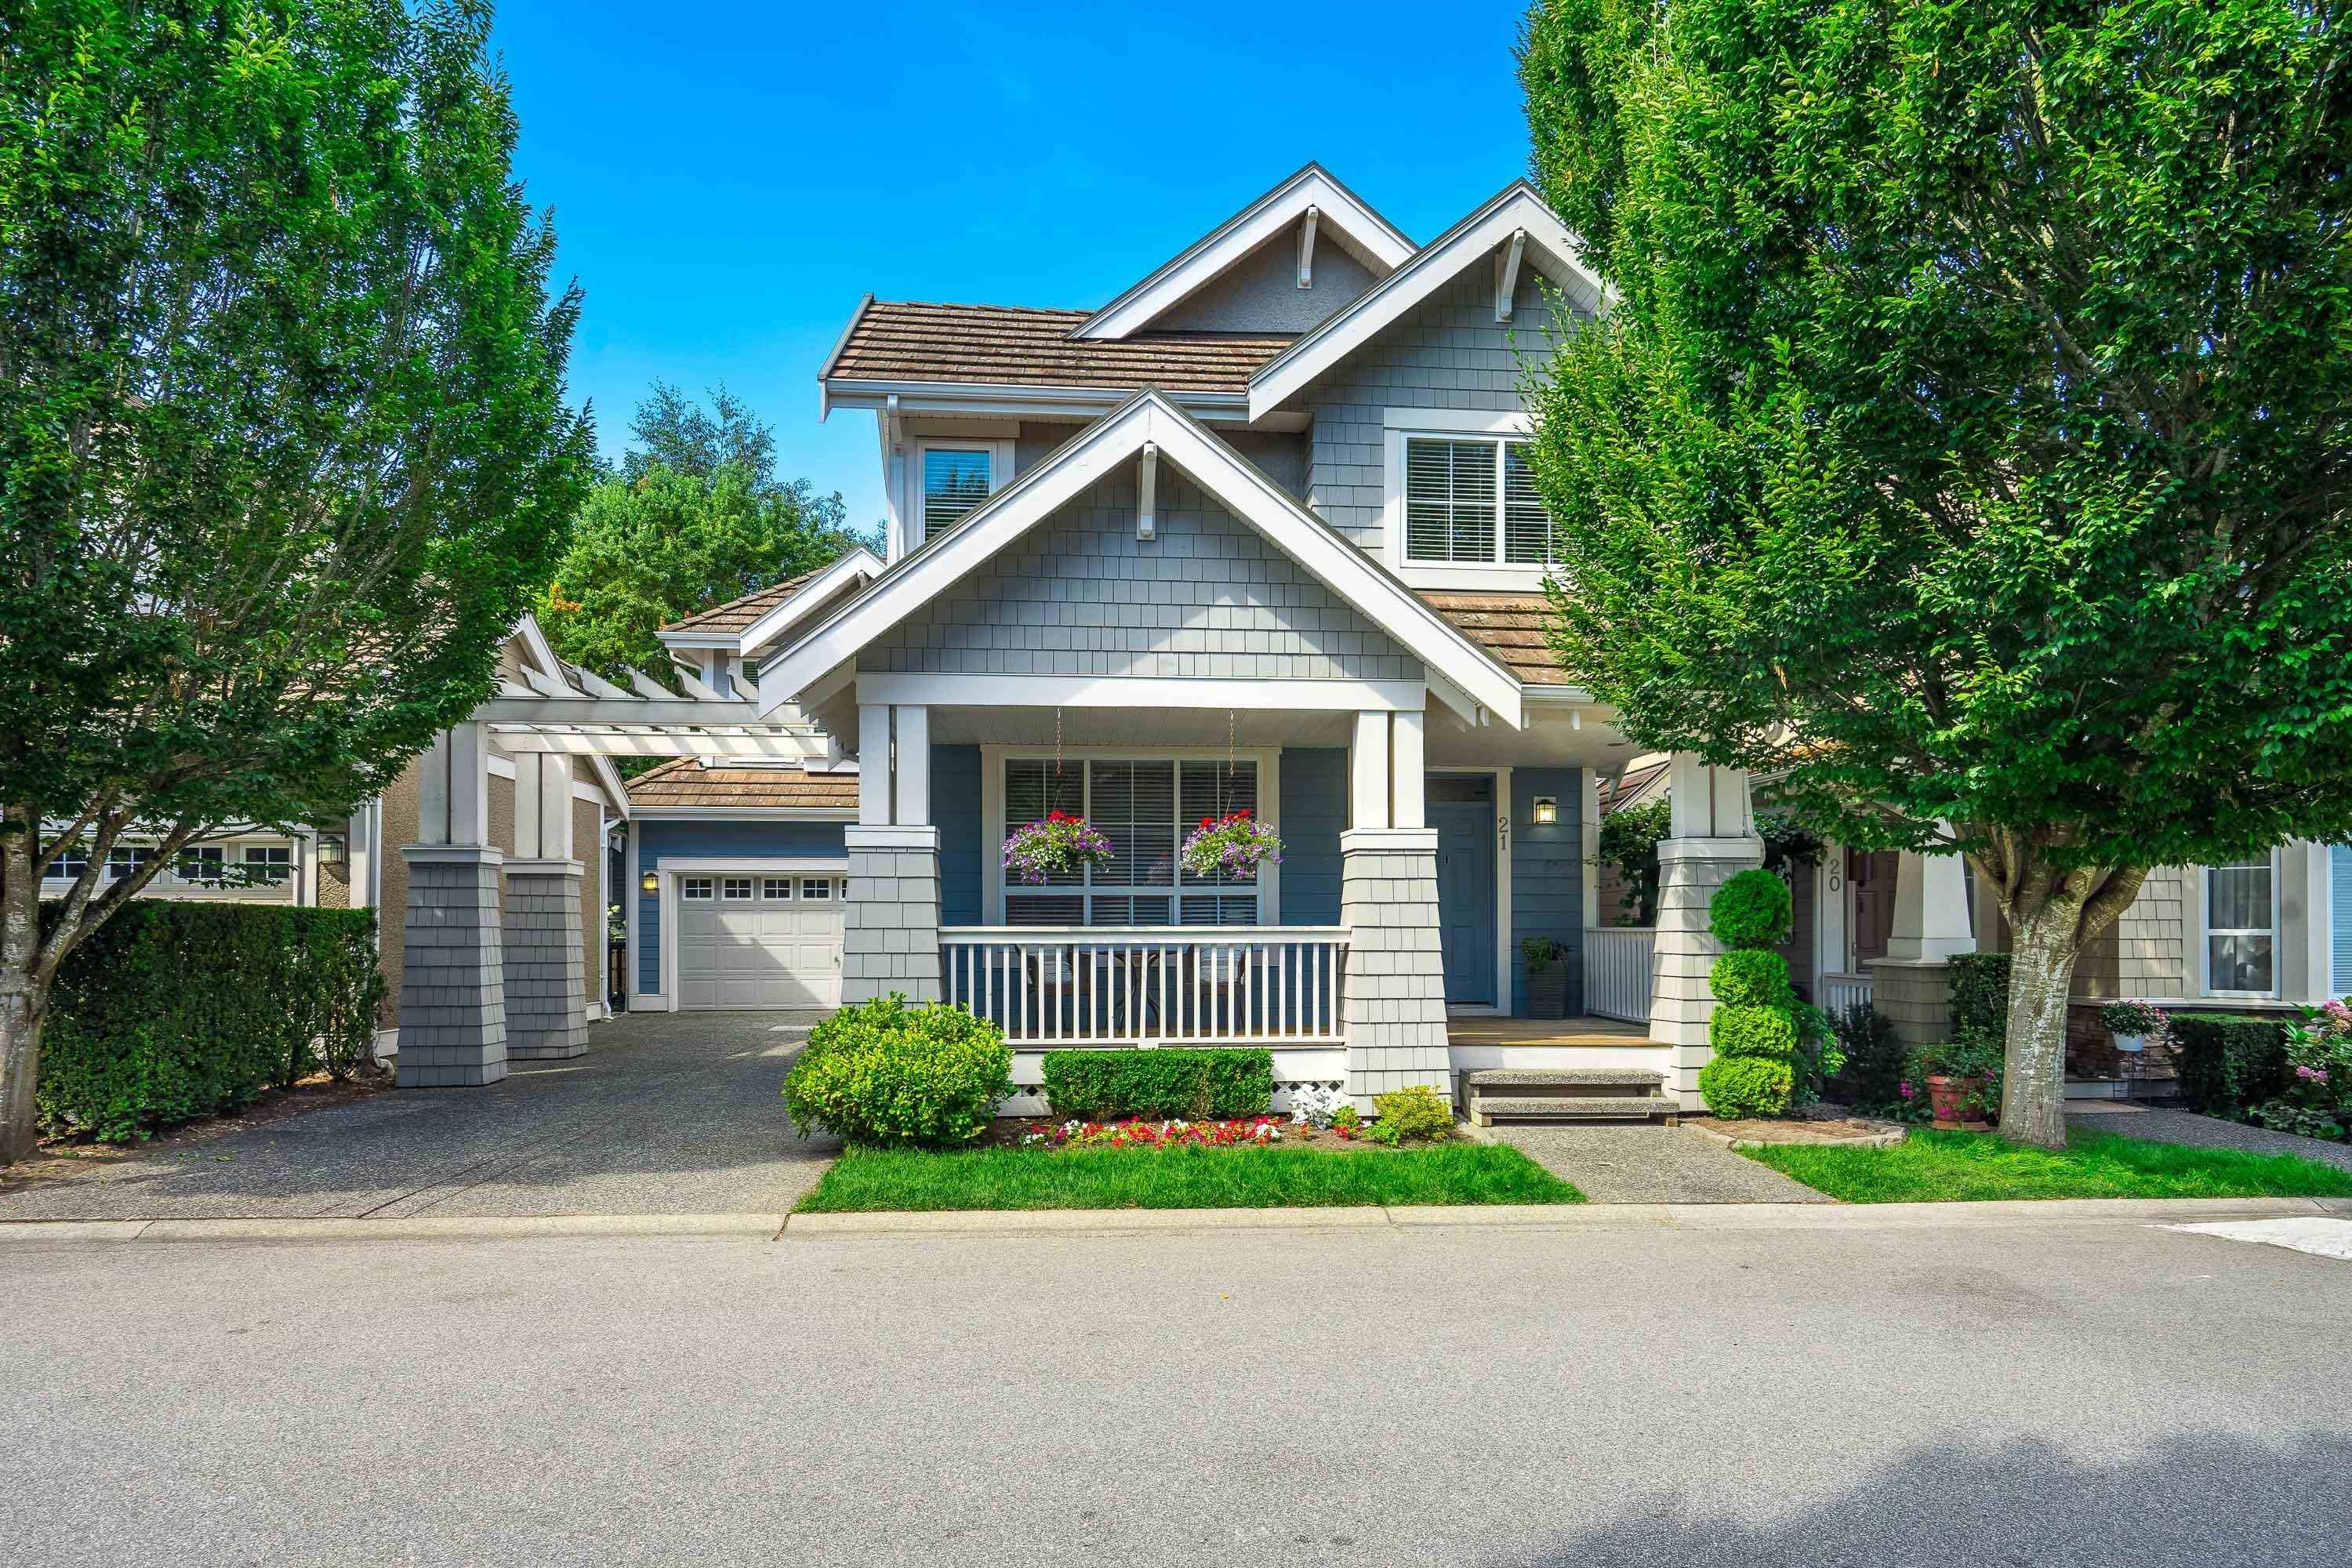 New property listed in Morgan Creek, South Surrey White Rock